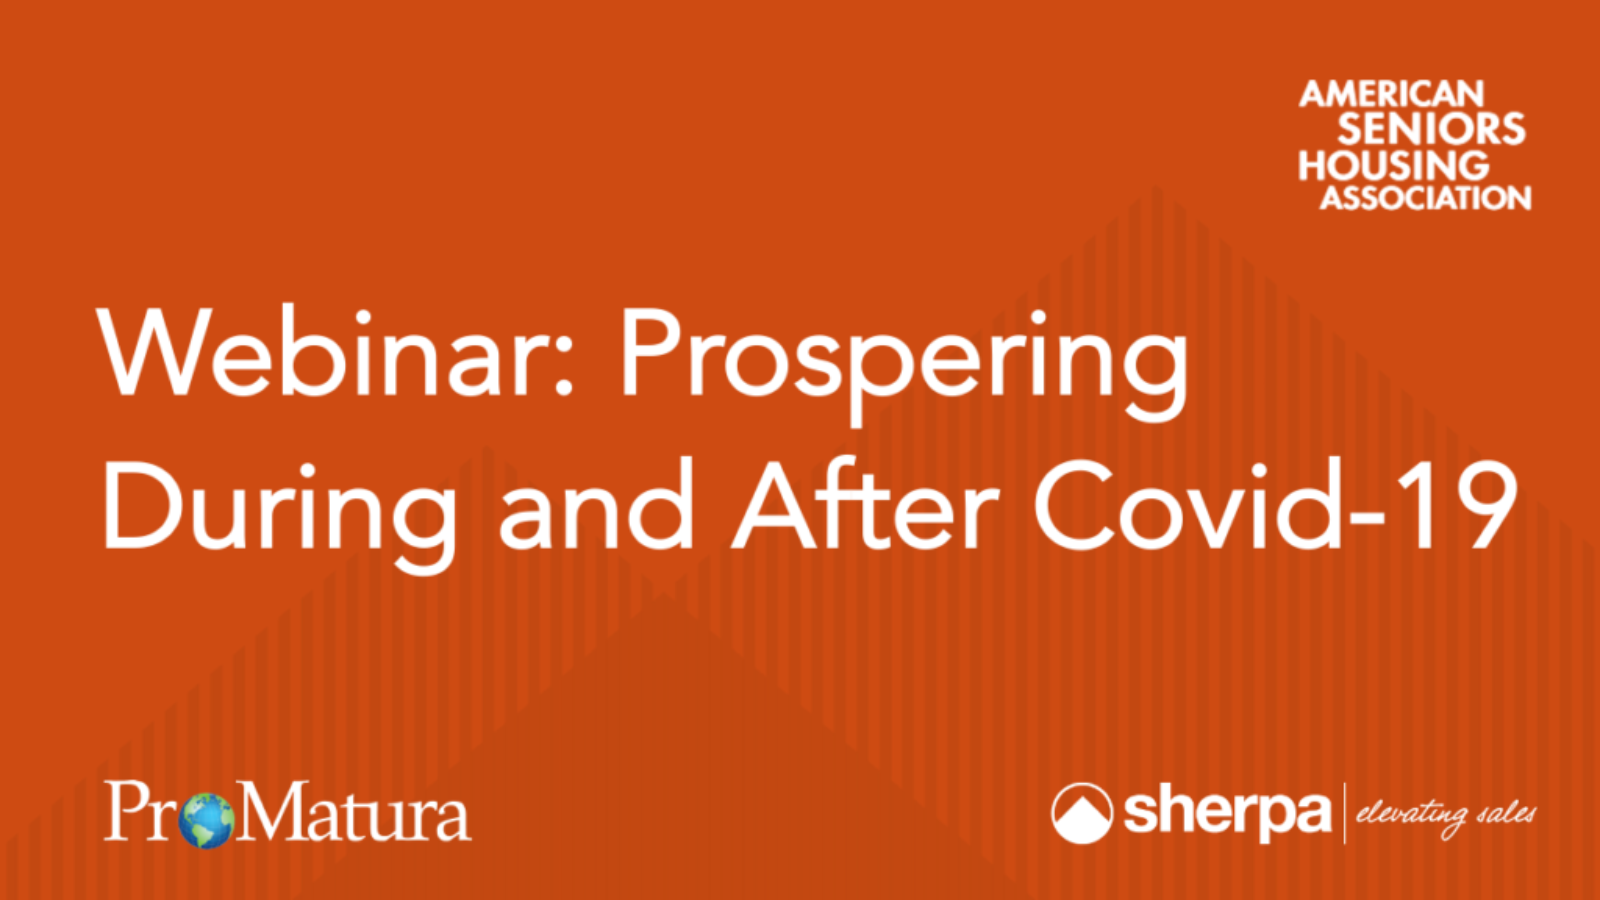 Webinar: Prospering During and After Covid-19